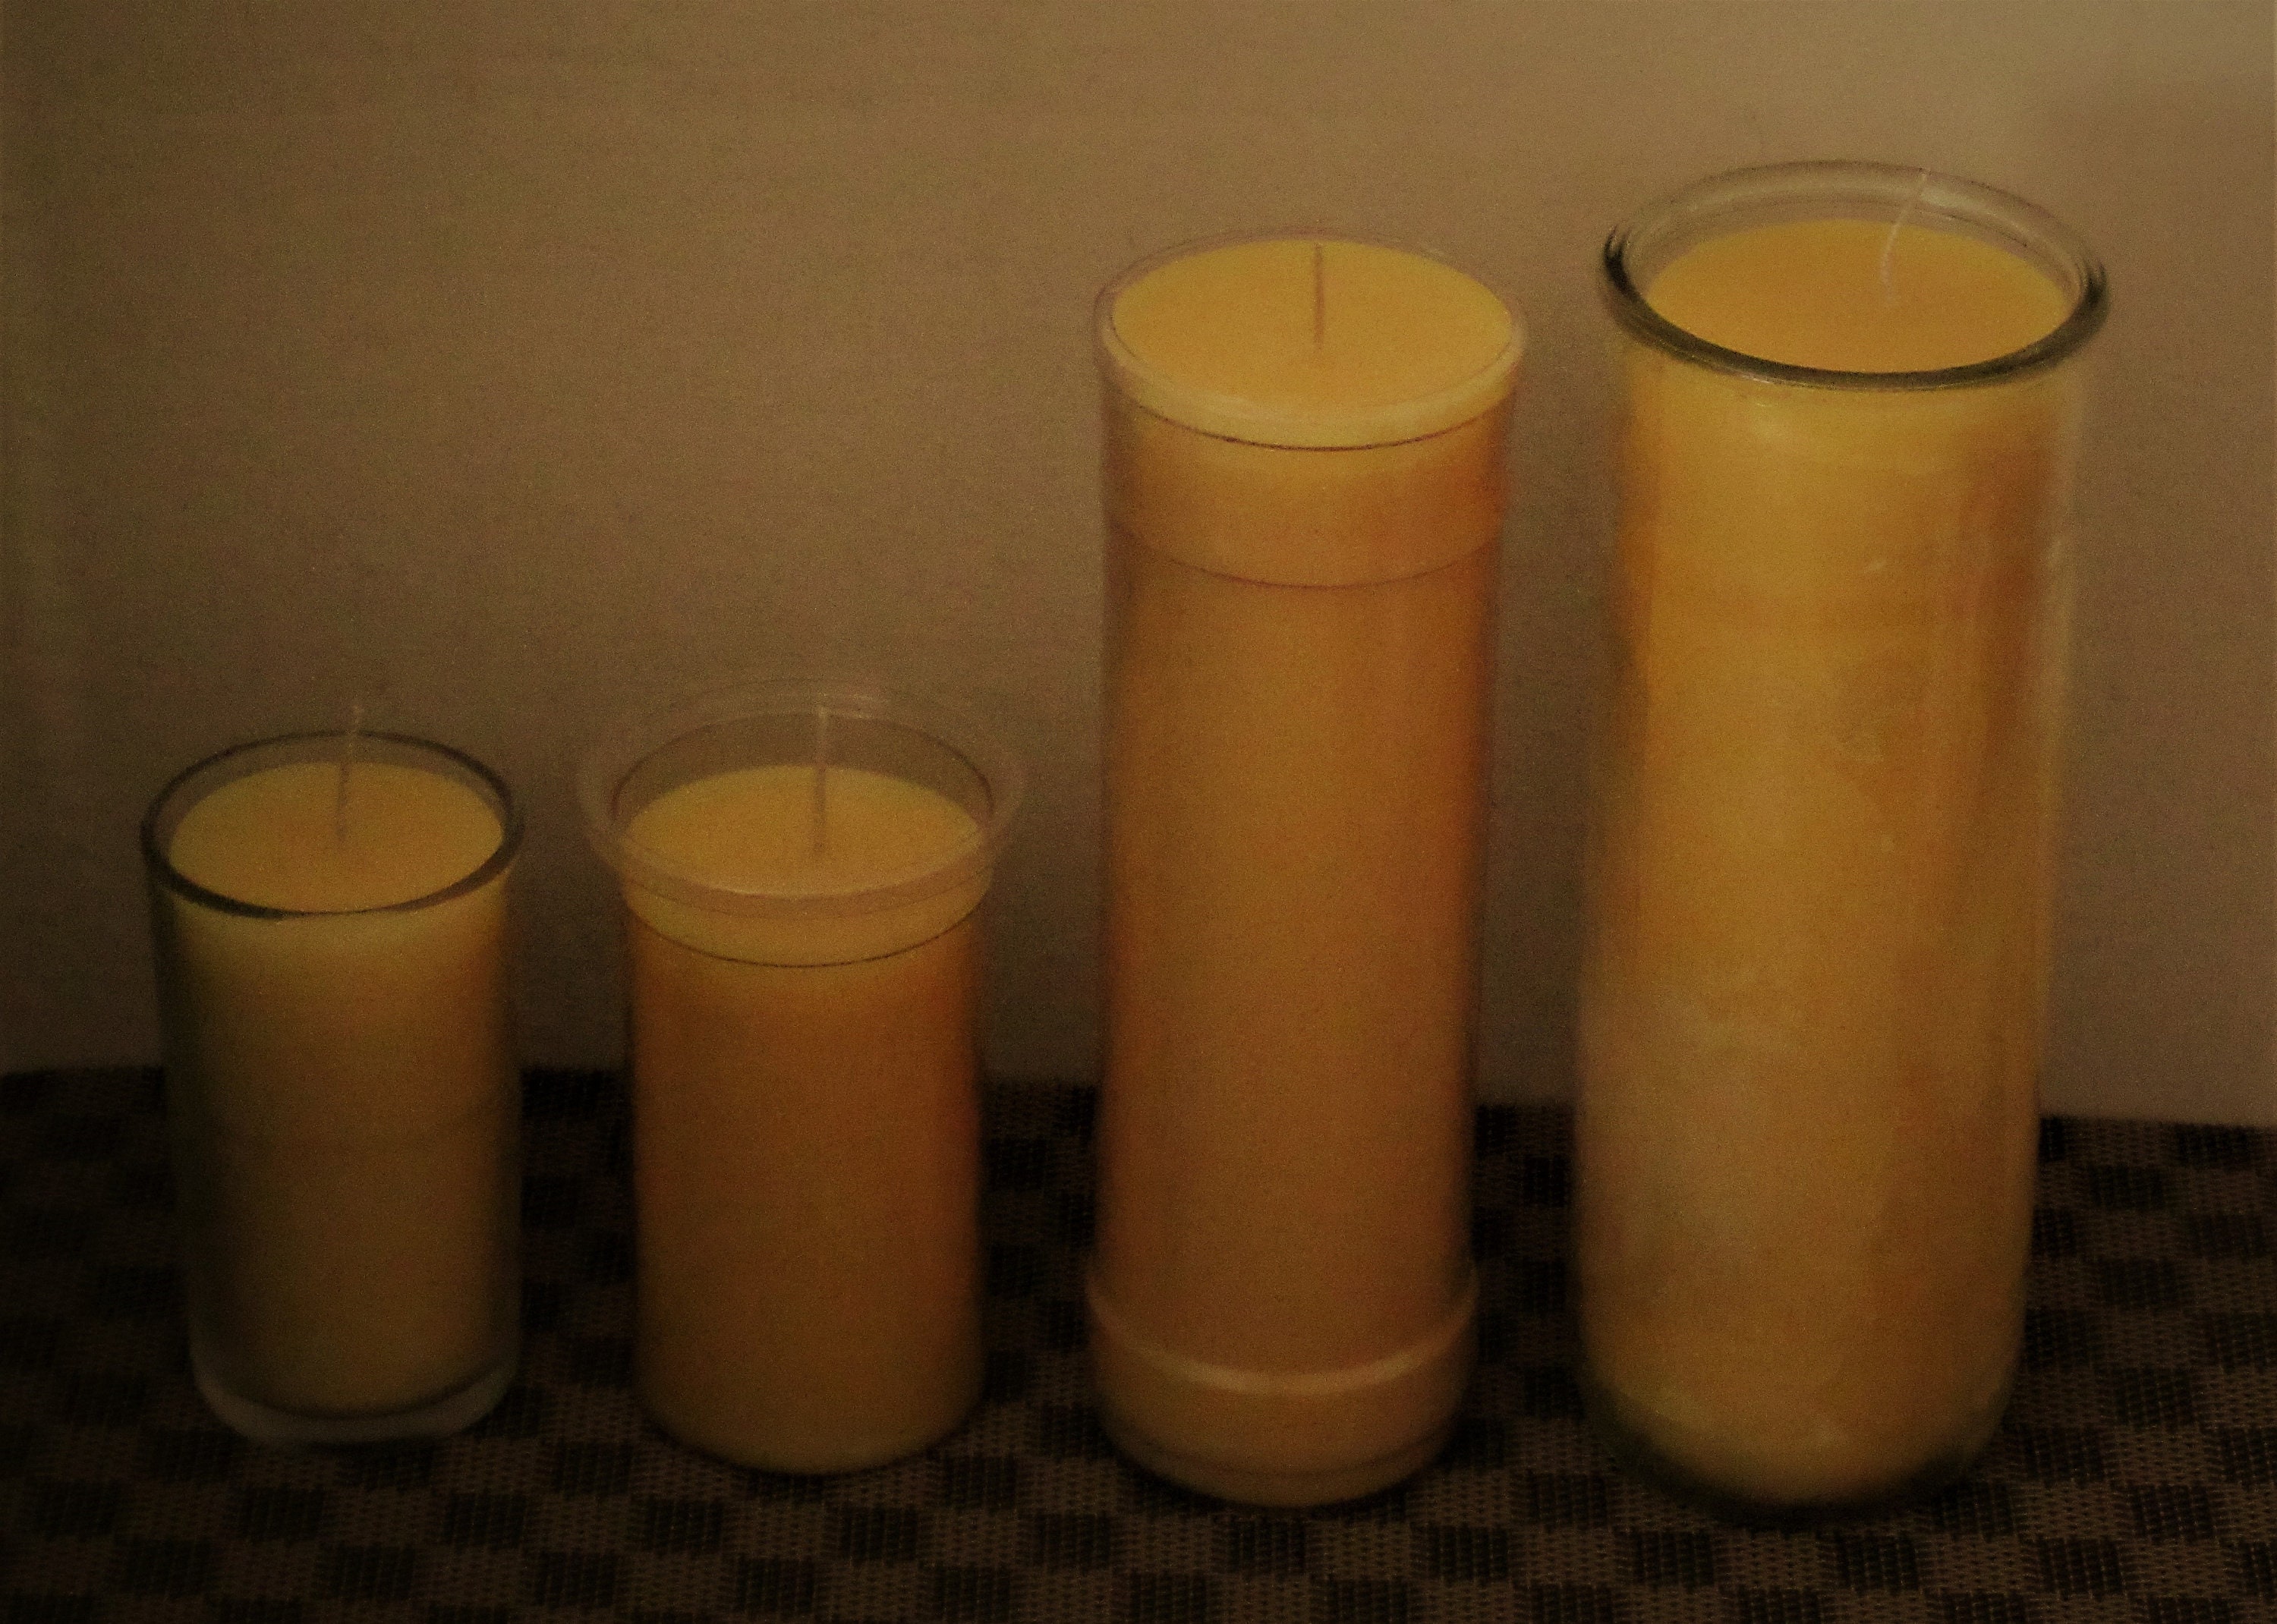 EMERGENCY CANDLE SET, CANDLES, HOLDERS, HOME DECOR